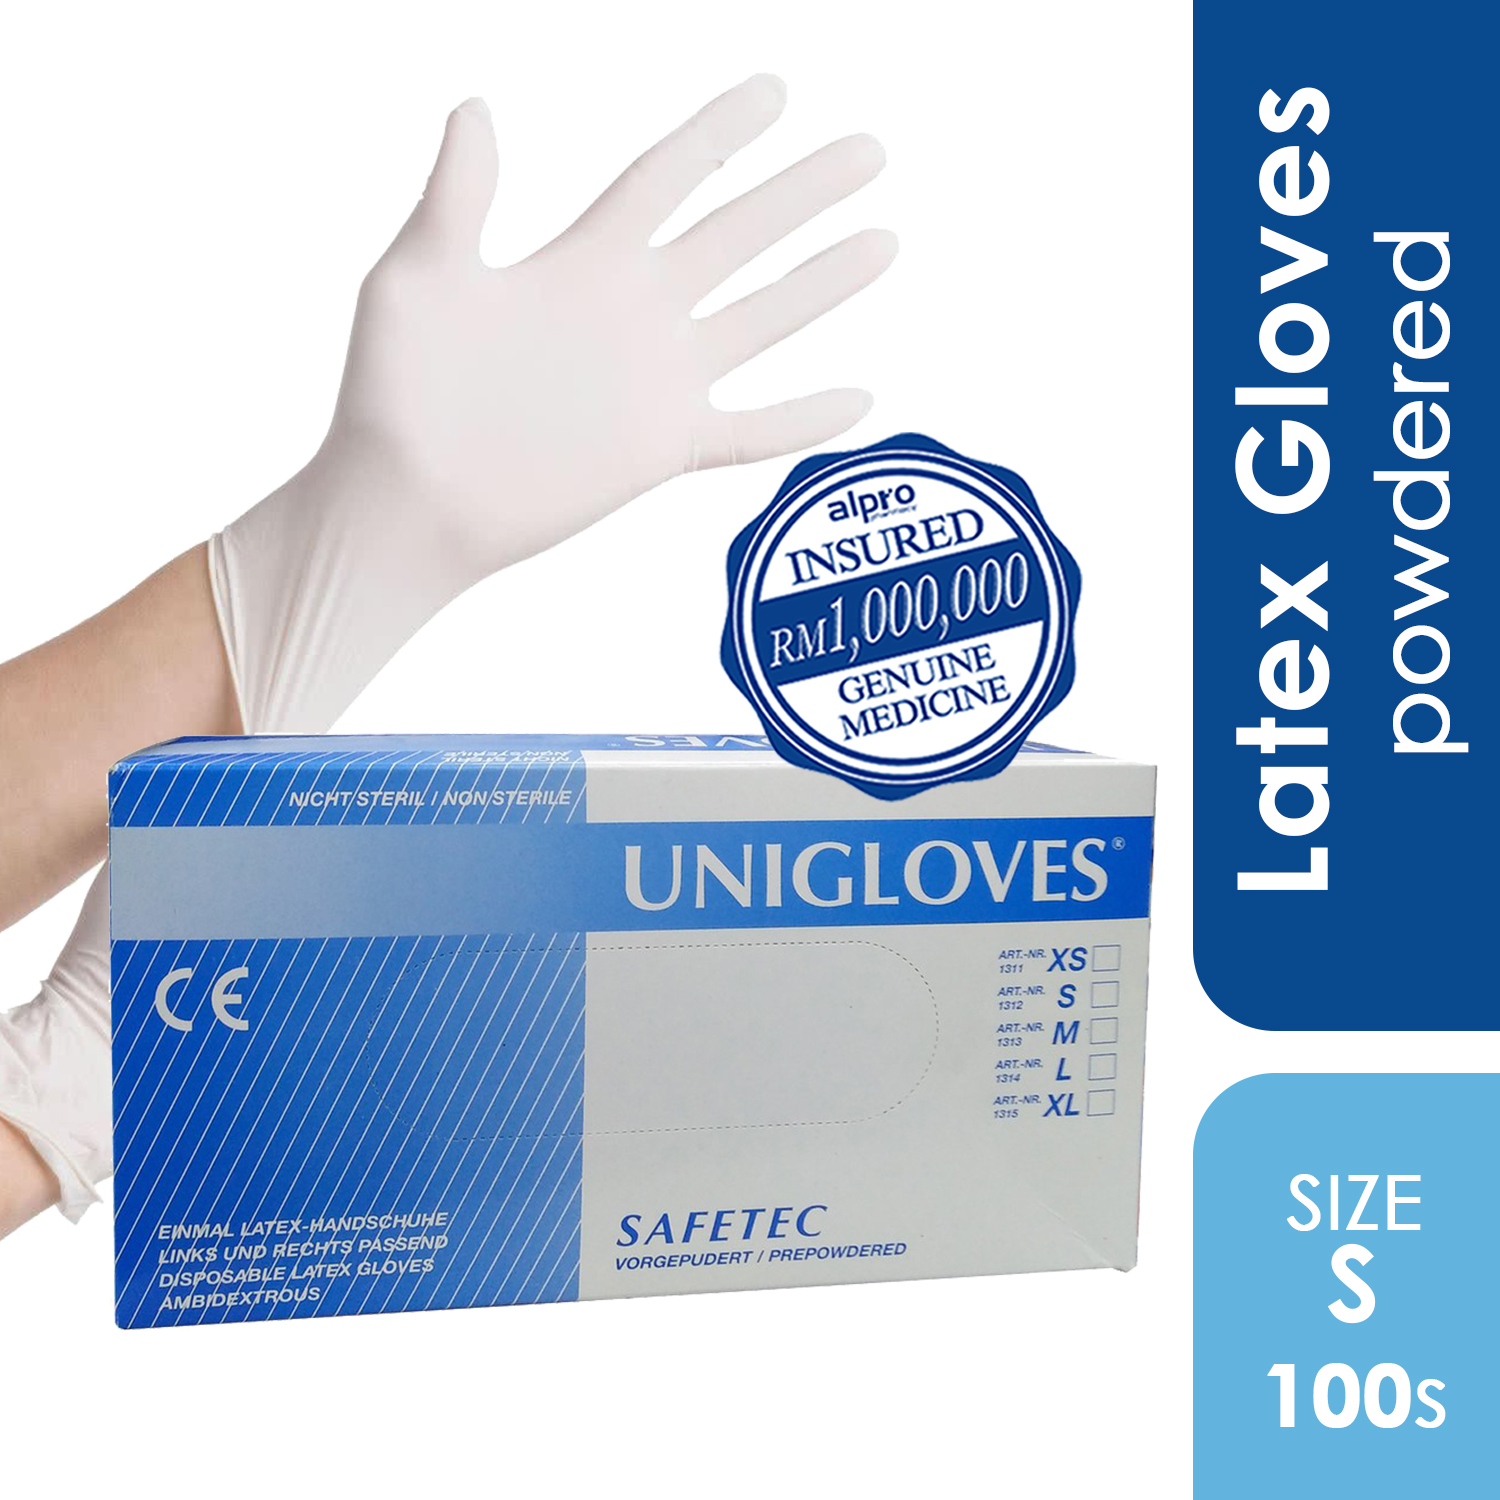 Unigloves Safetex Latex Gloves S (powdered) 100s - Alpro Pharmacy